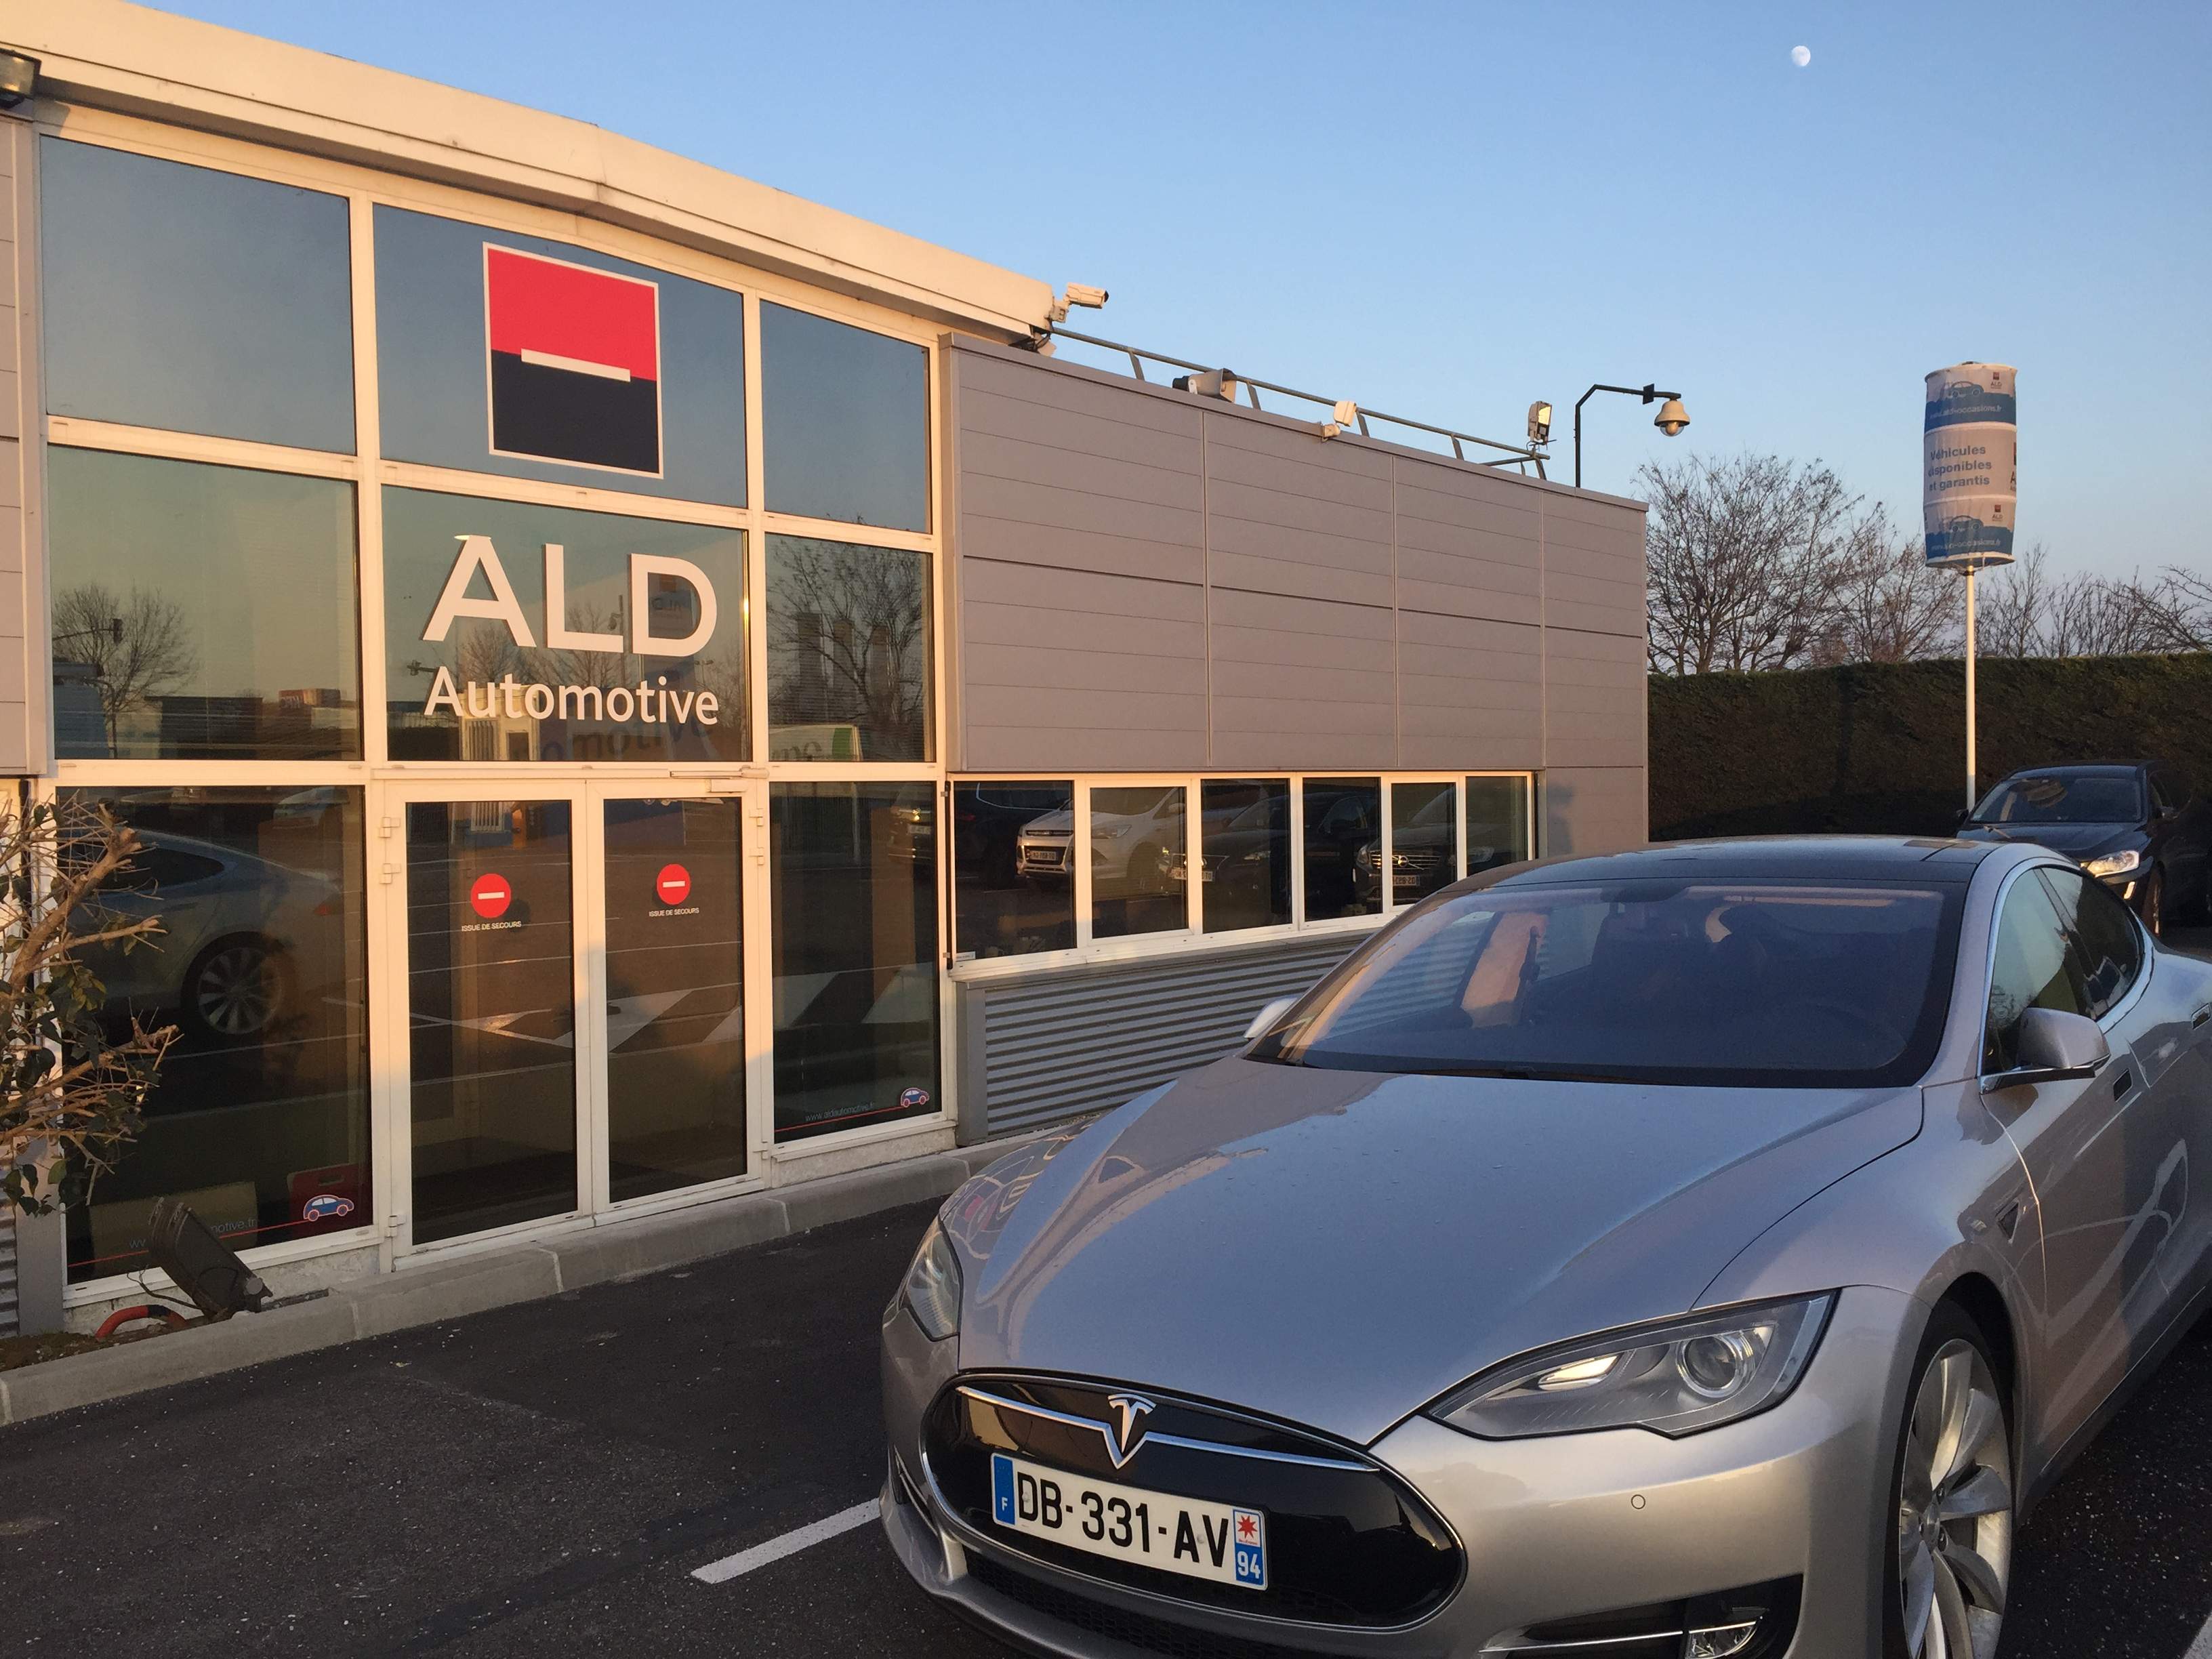 ALD Automotive launches car sharing platform in 3 new countries